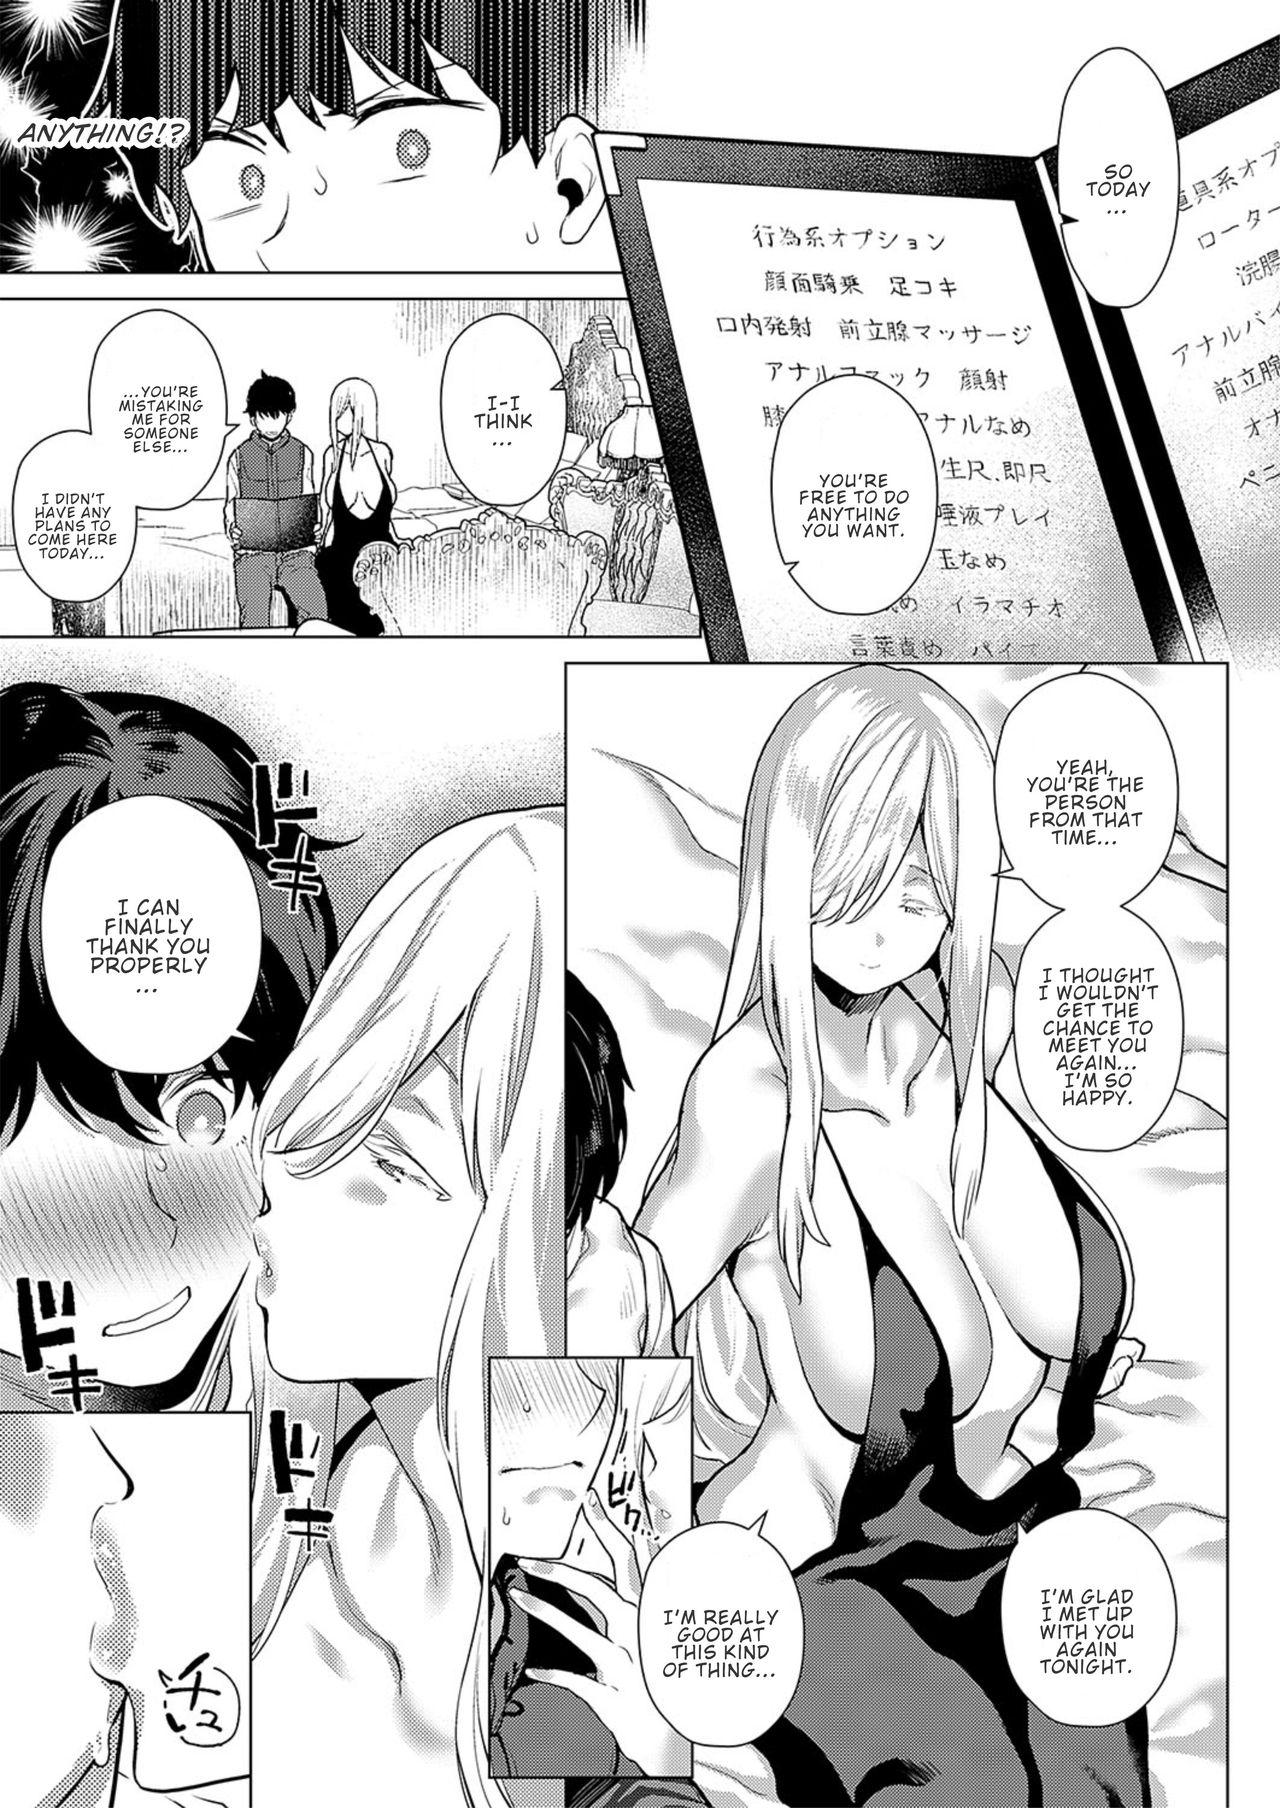 Ass Lick Ano Toki Anata to | That Time with You Hijab - Page 7